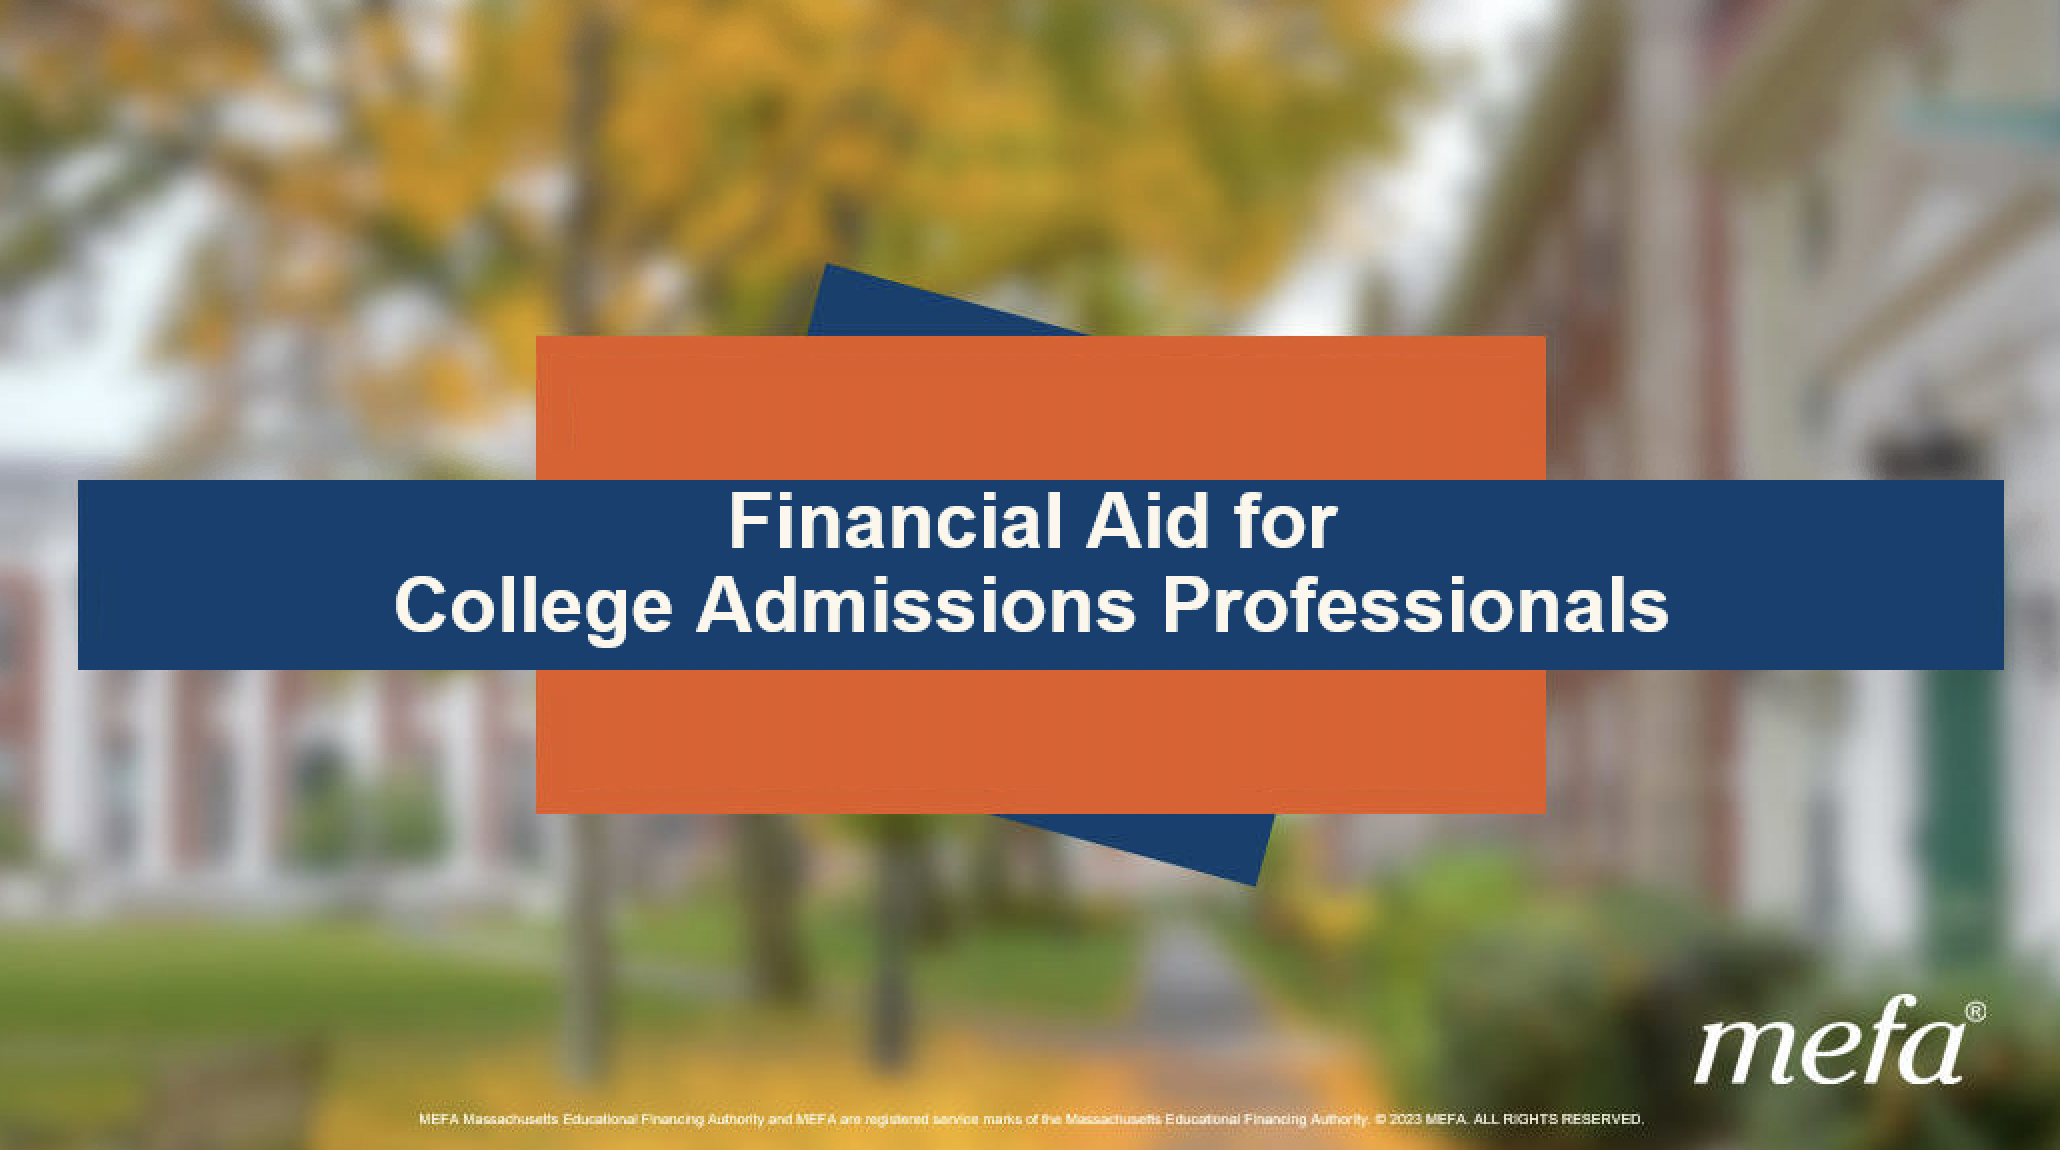 Financial Aid for College Admissions Professionals